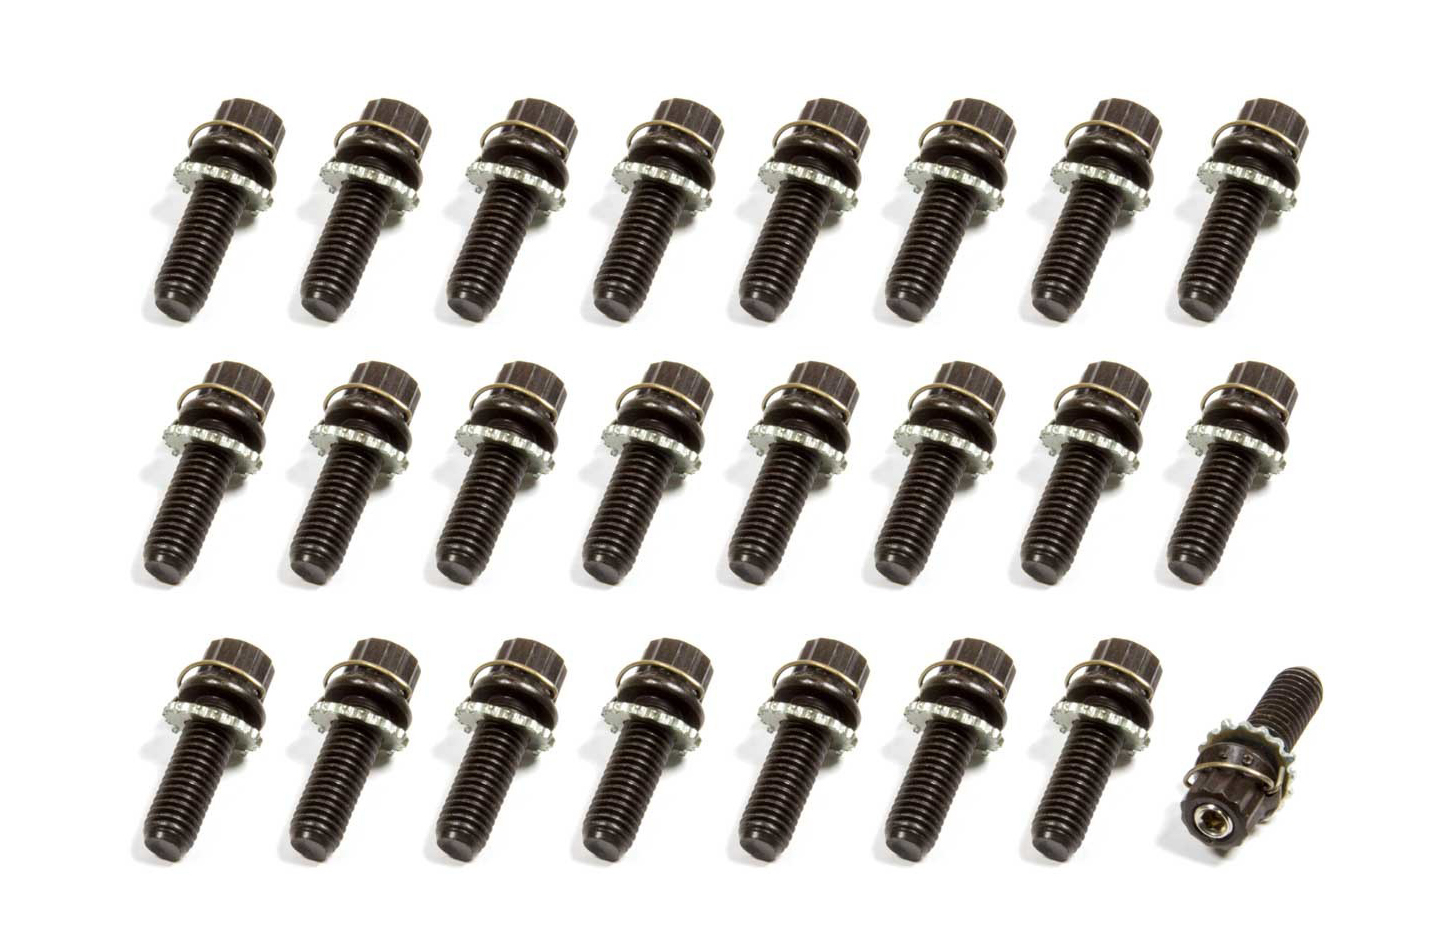 Taylor Cable 310070 Header Bolt, Vibe-Lock, 8 mm x 1.25 Thread, 25 mm Long, 12 Point Head, Steel, Black Oxide, Set of 16